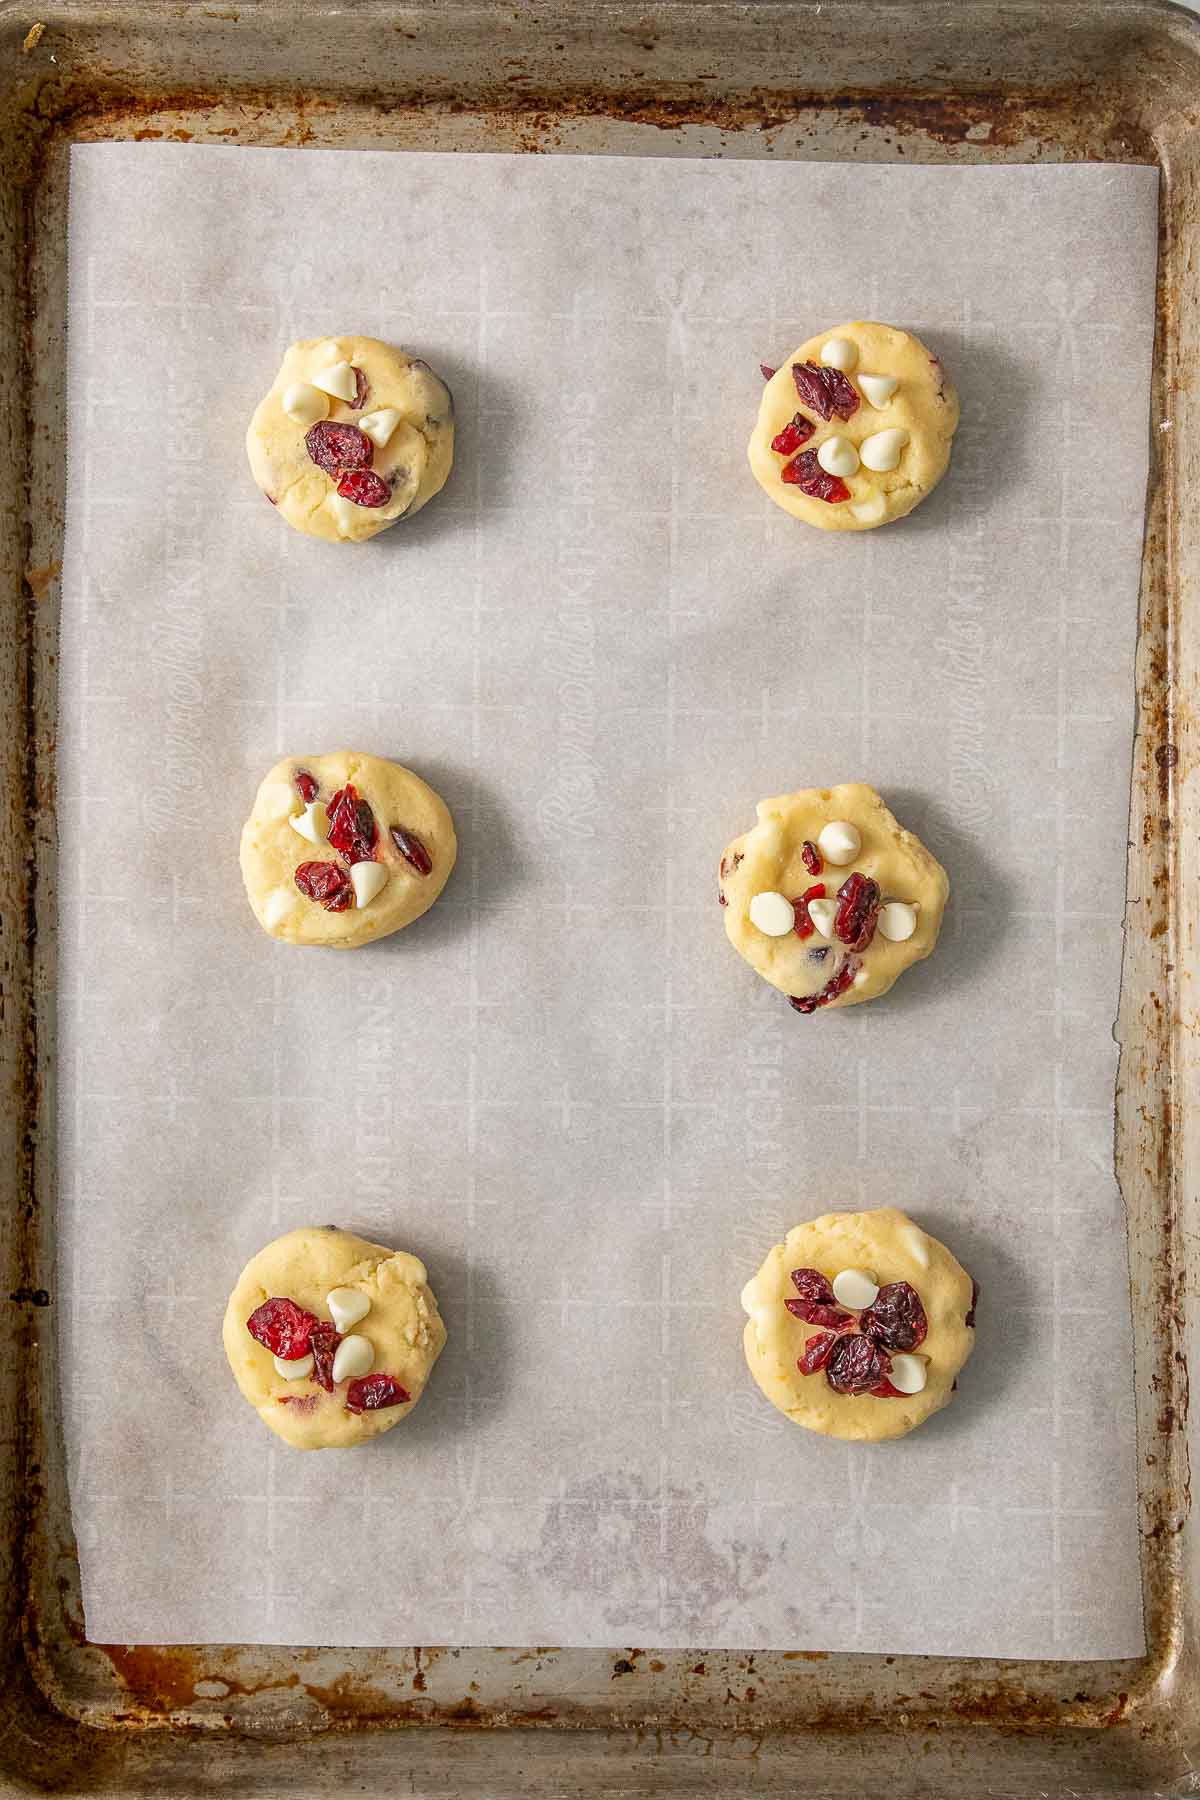 White chocolate cranberry cookie dough scooped onto a baking sheet.